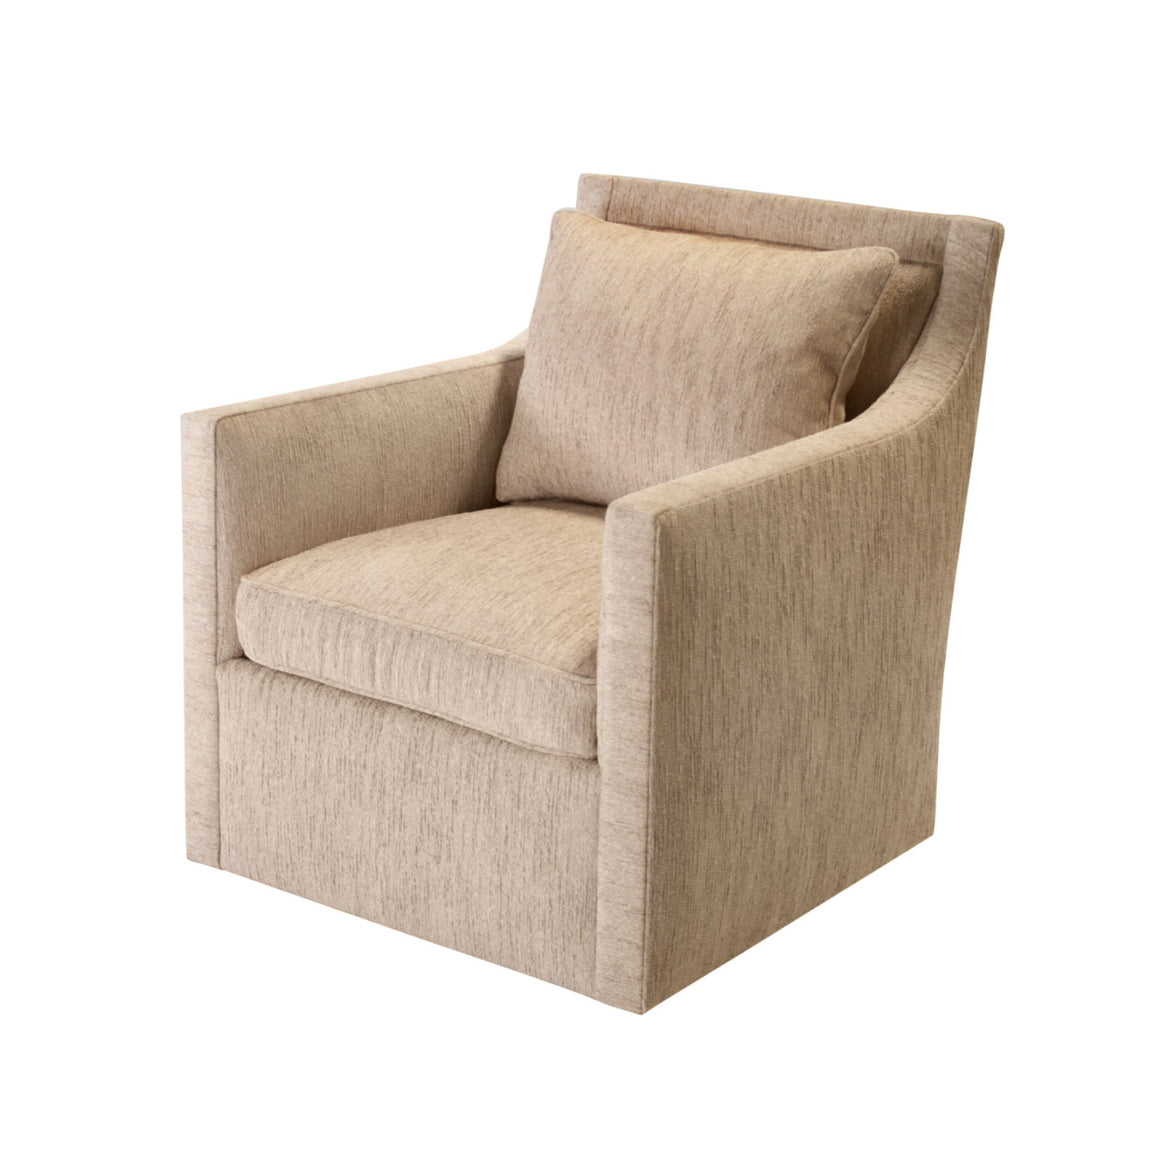 Kimberly Swivel Chair- Grotto Oyster